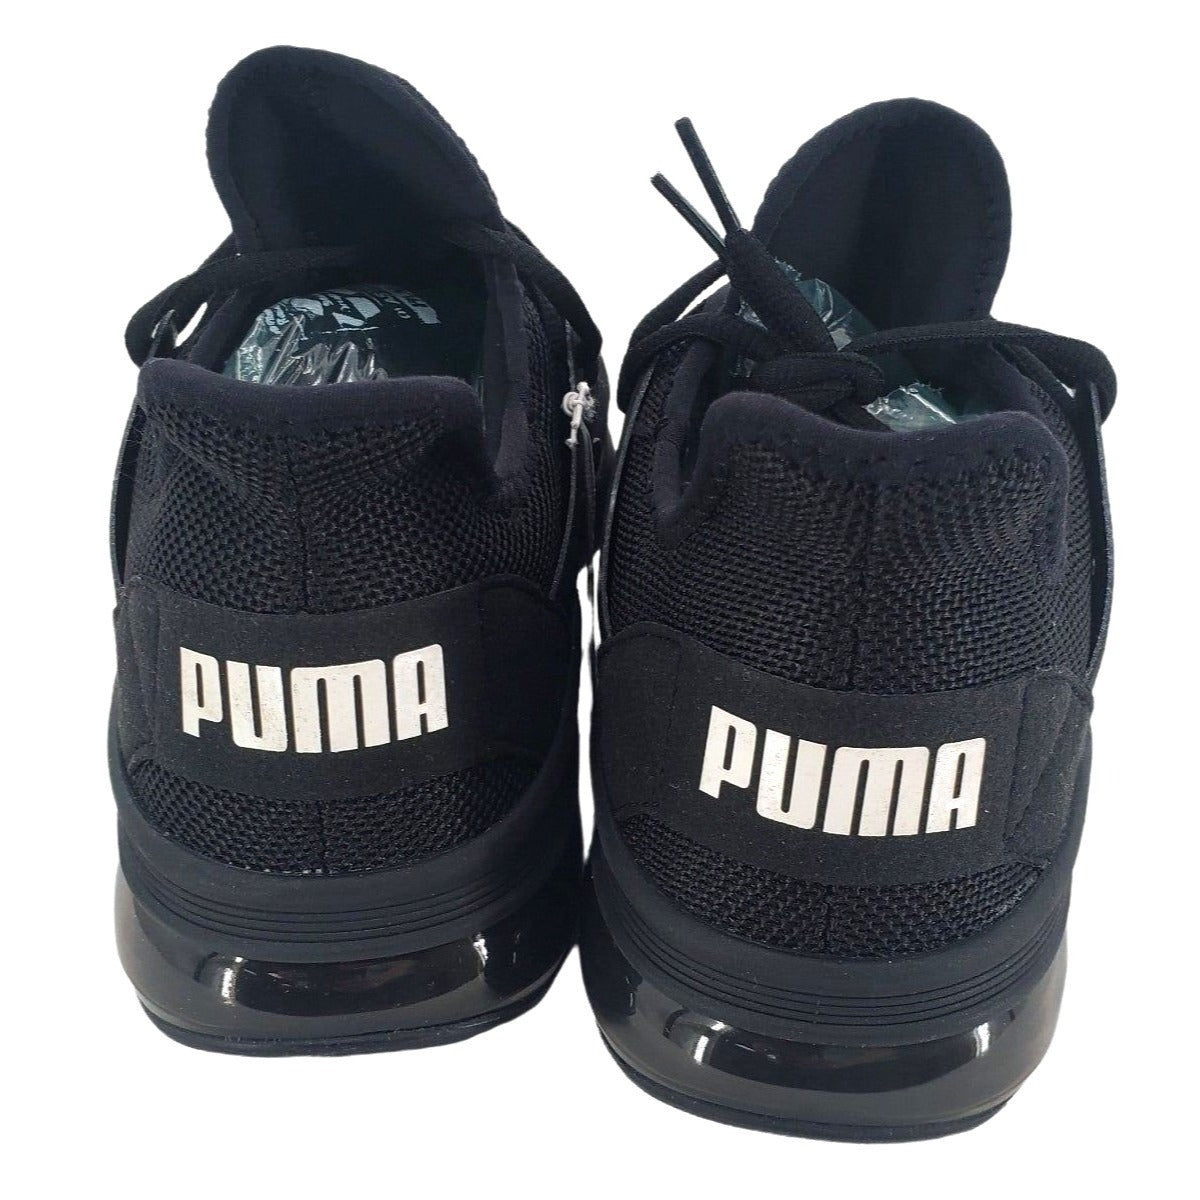 PUMA Sneakers Men's Electron Slip-on Athleisure Street Activewear Shoes